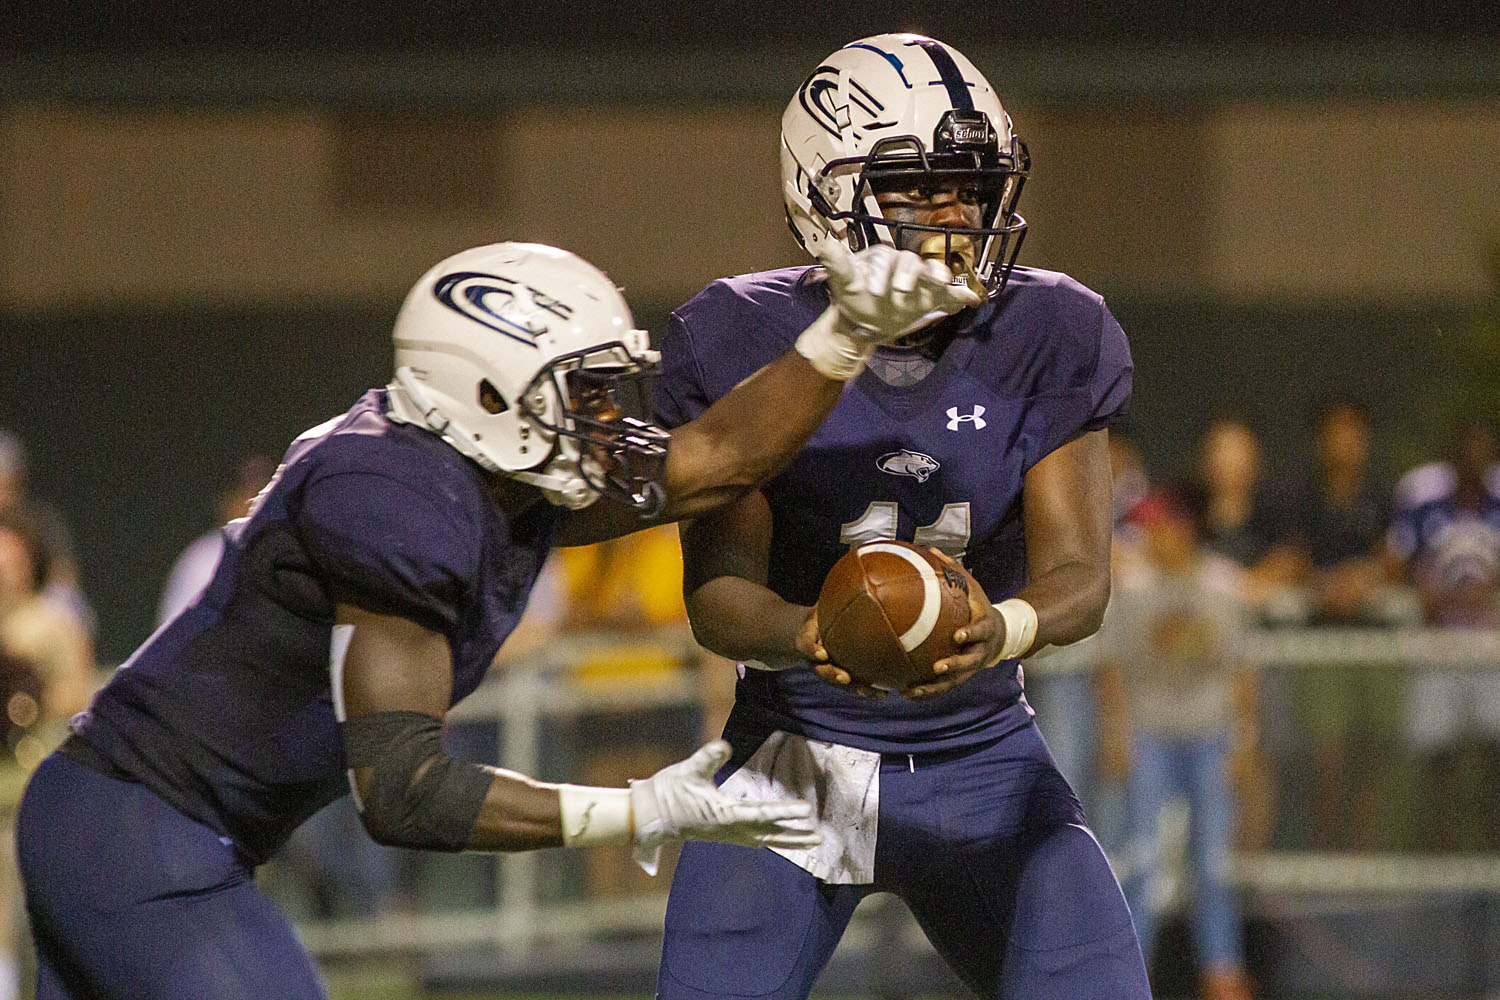 Clay-Chalkville has no trouble with Huffman, concludes region play with 4 straight wins